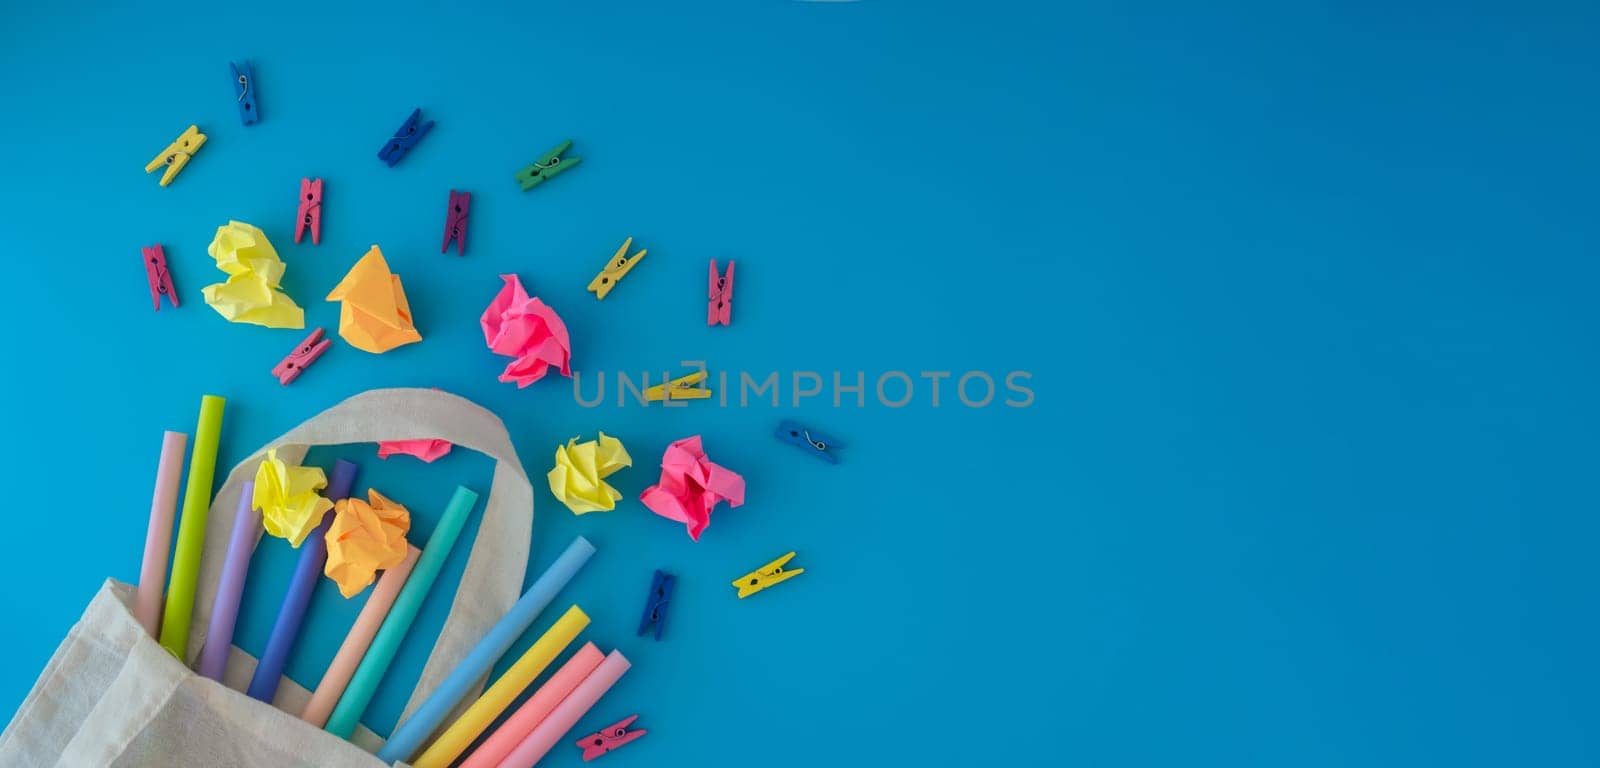 Banner poster Frame border made of school stationery supplies. Copy space for your text or Educational greeting announcement for students and teacher. Creative vivid colorful background. Concept of new school year Top view flat lay